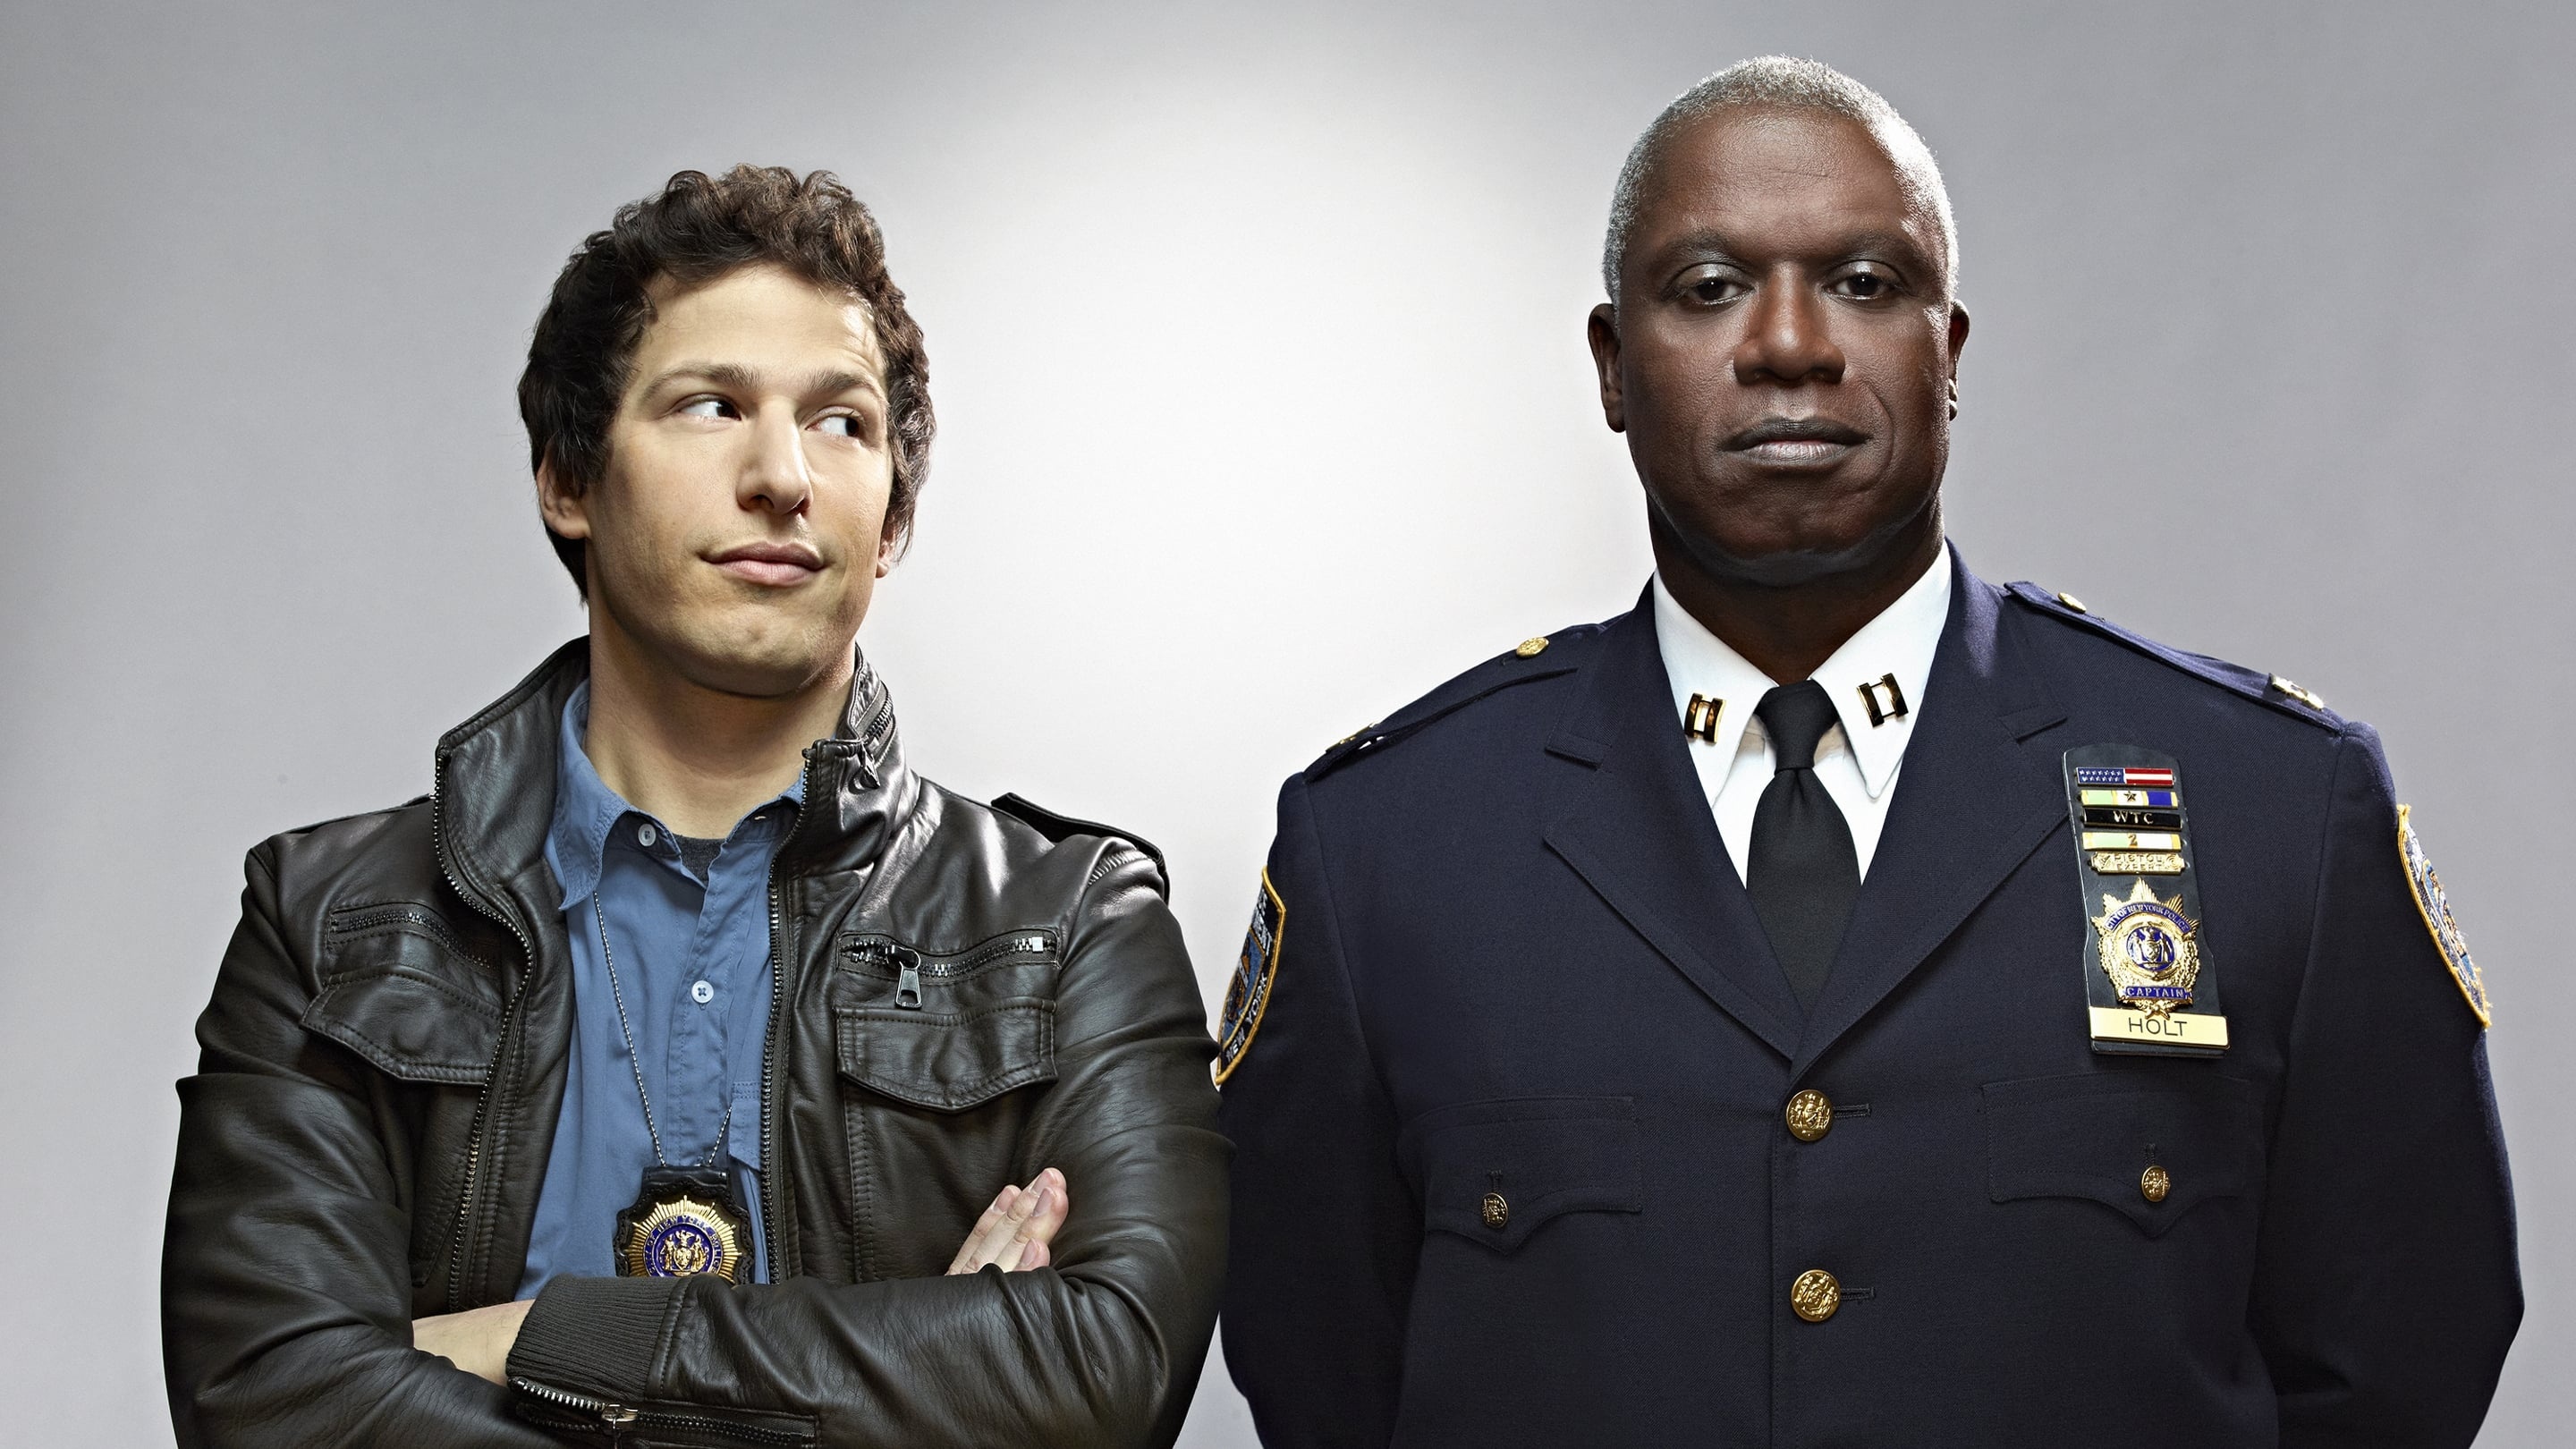 Brooklyn Nine-Nine (TV Series): Team of detectives headed by the serious and intellectual Captain. 2880x1620 HD Background.